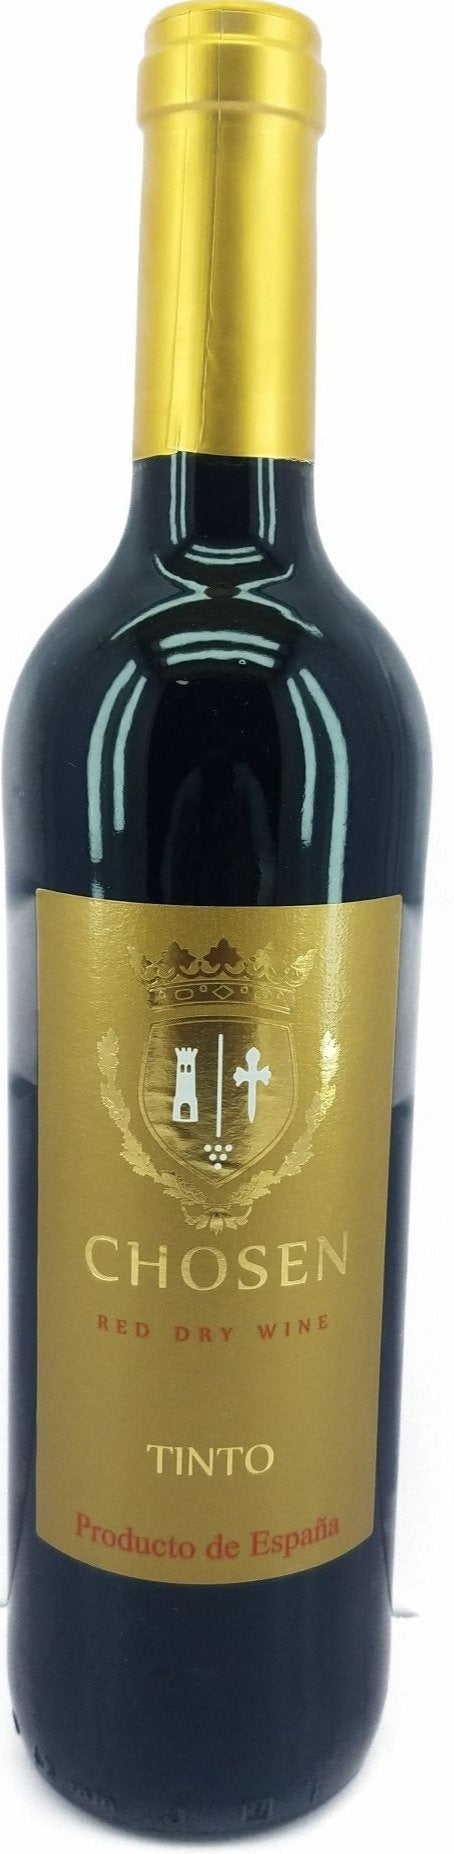 Chosen Tinto Red Wine 75cl